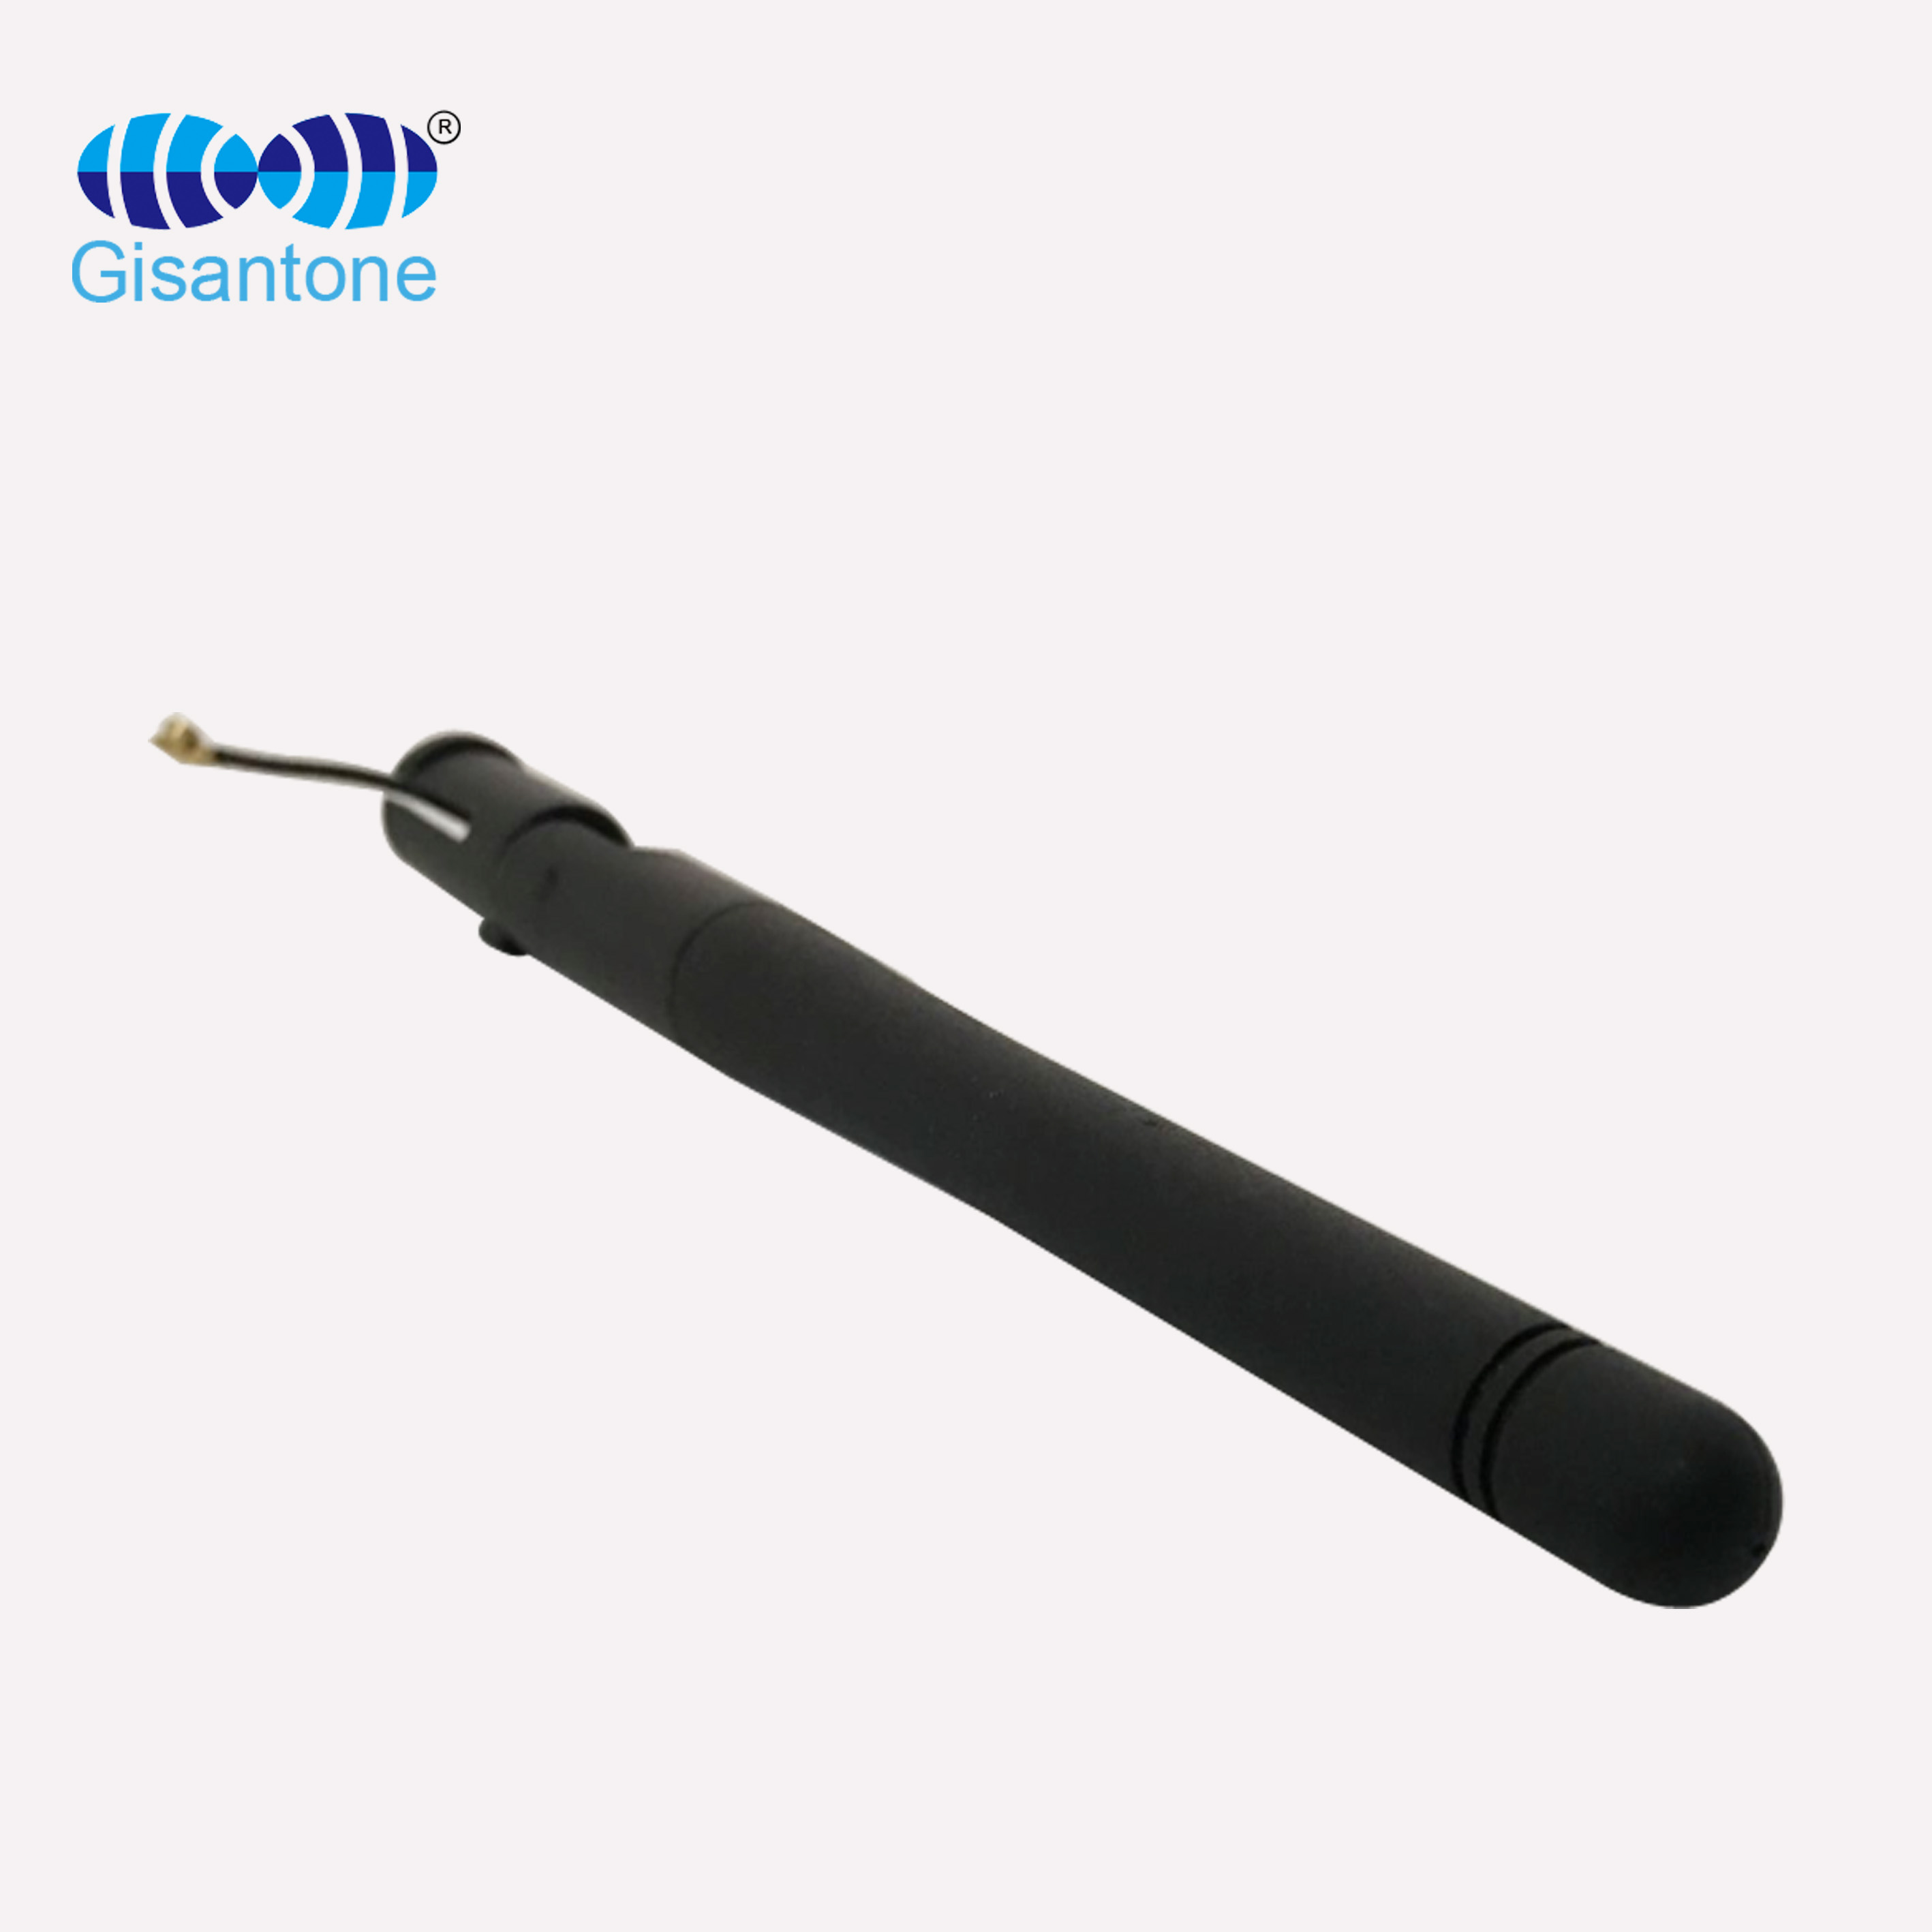 2.4G antenna with ipex connector